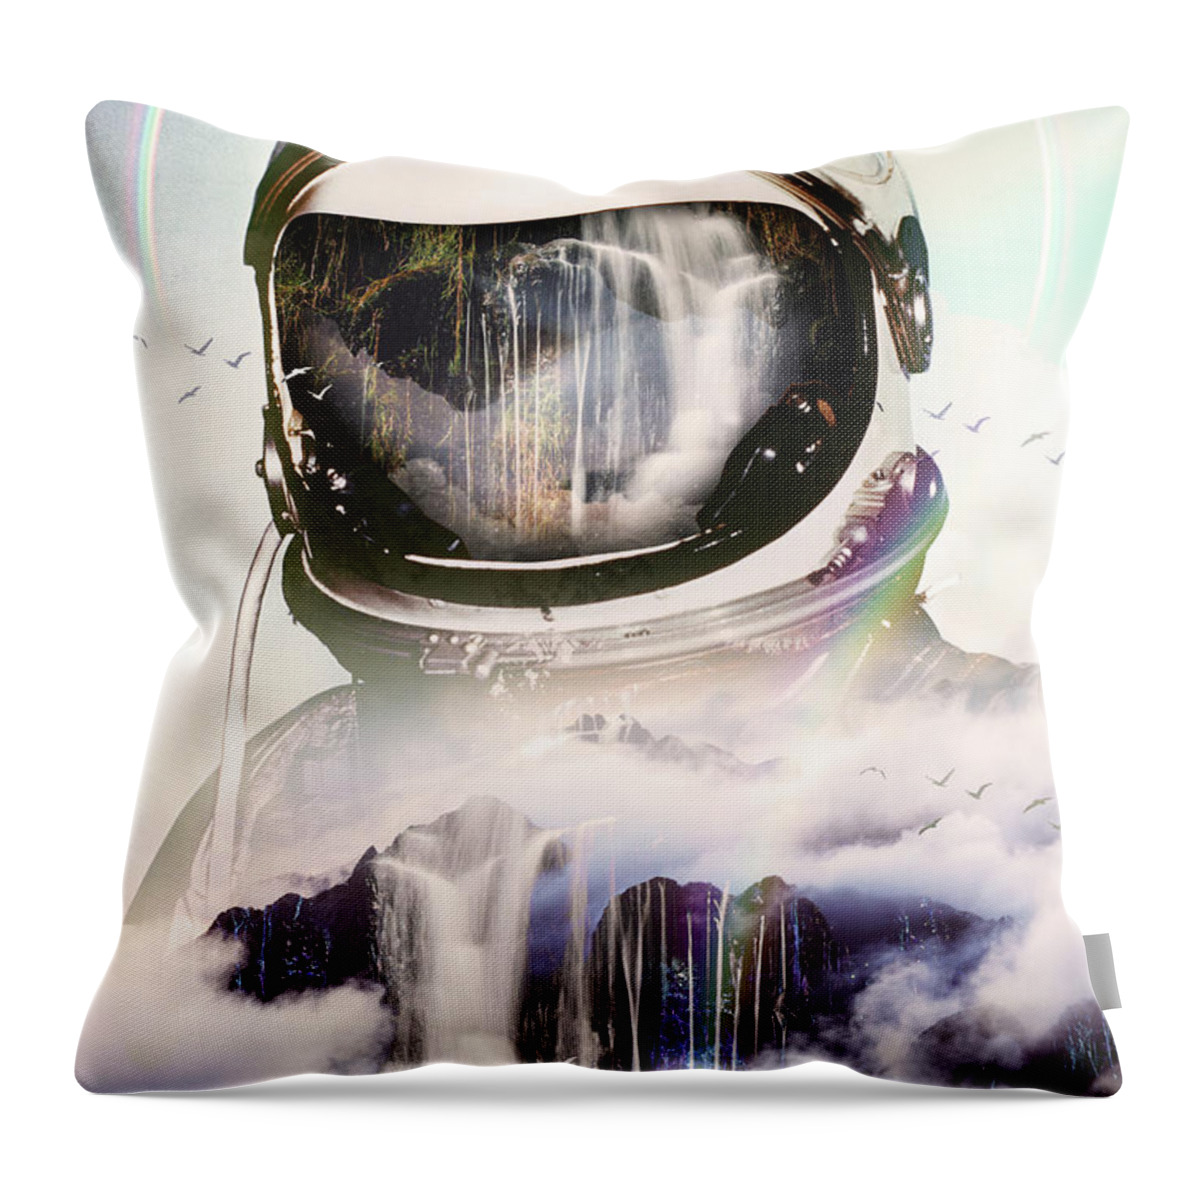 Astronaut Throw Pillow featuring the digital art The Spectator by Nicebleed